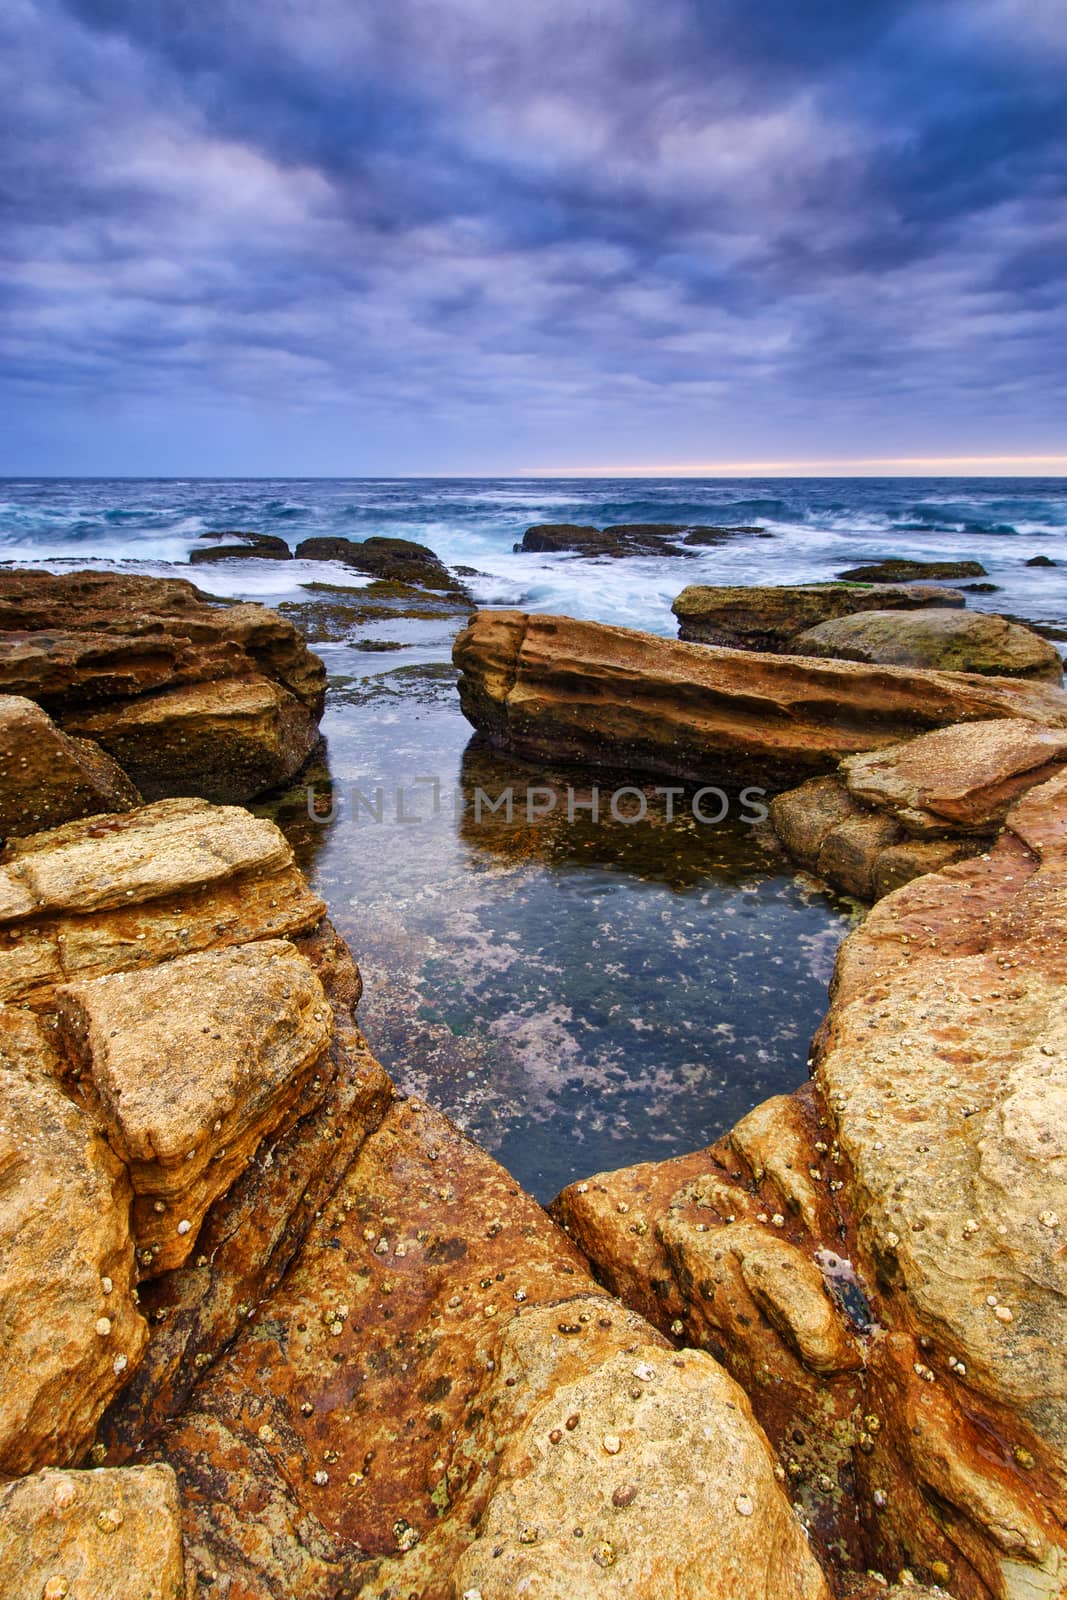 Sunrise seascape with orange rocks and ocean pools and sea shells with cloudy stormy sky and distant cliffs